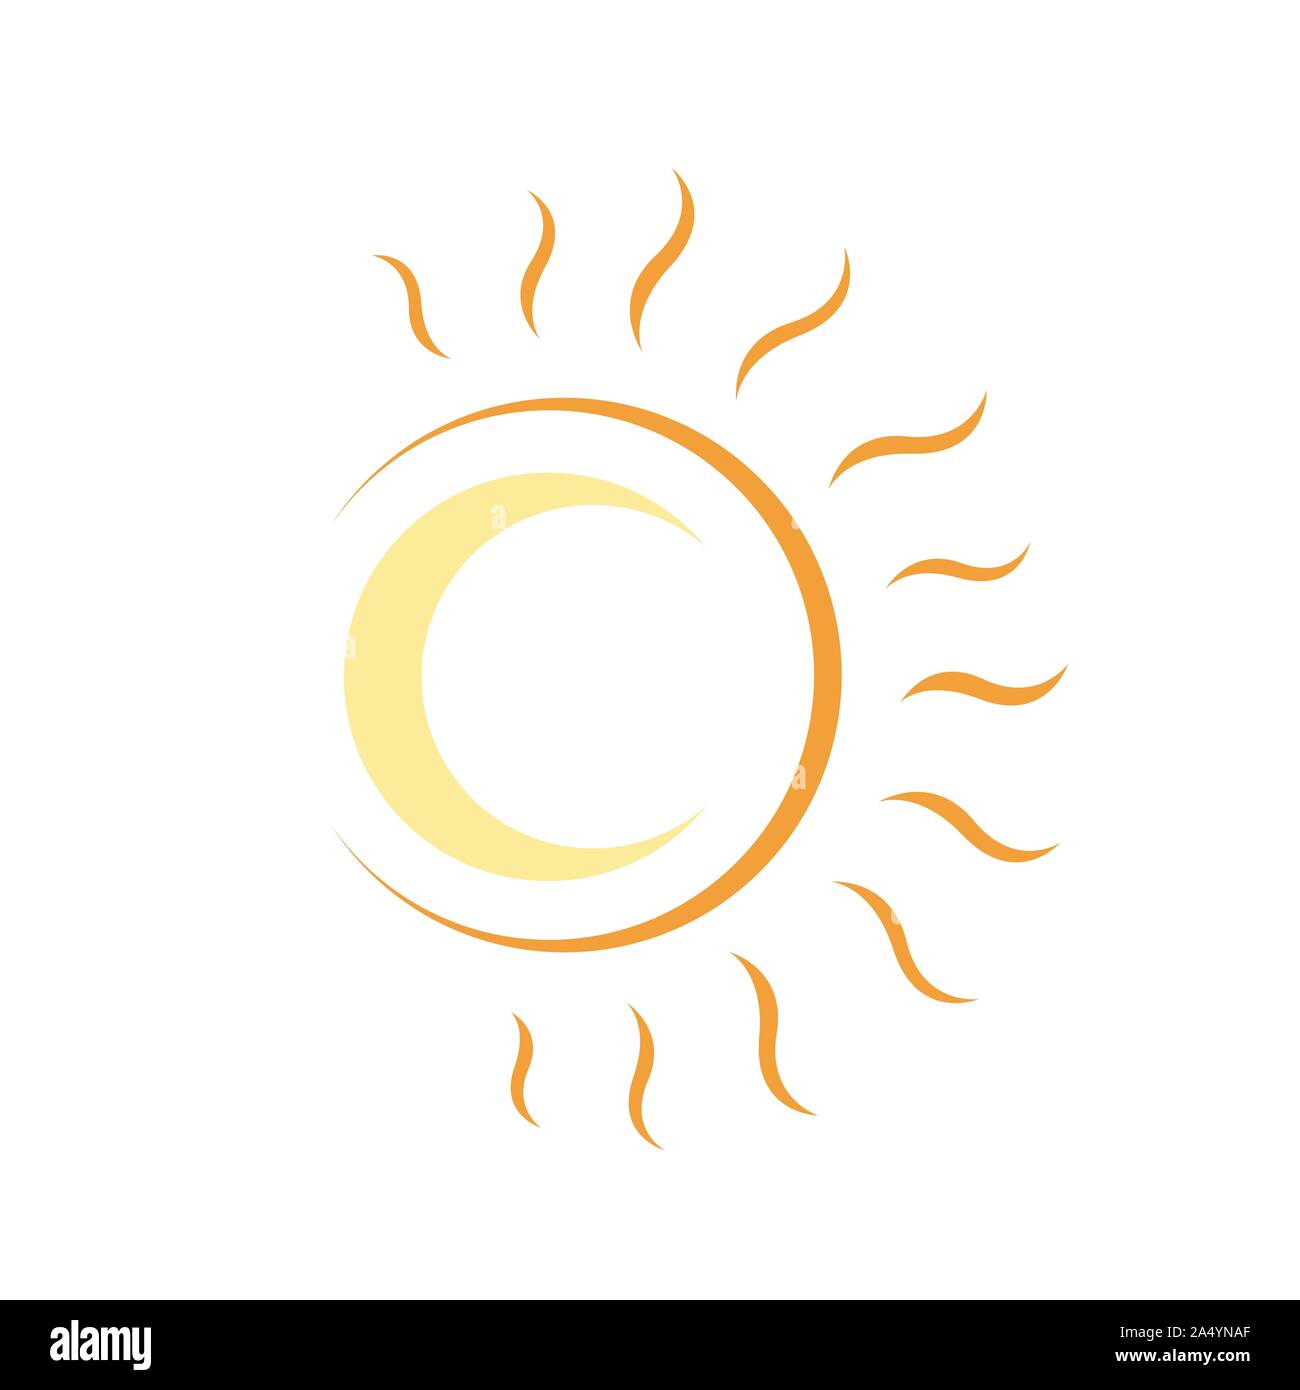 rays crescent sun and moon logo design vector graphic concept illustrations Stock Vector